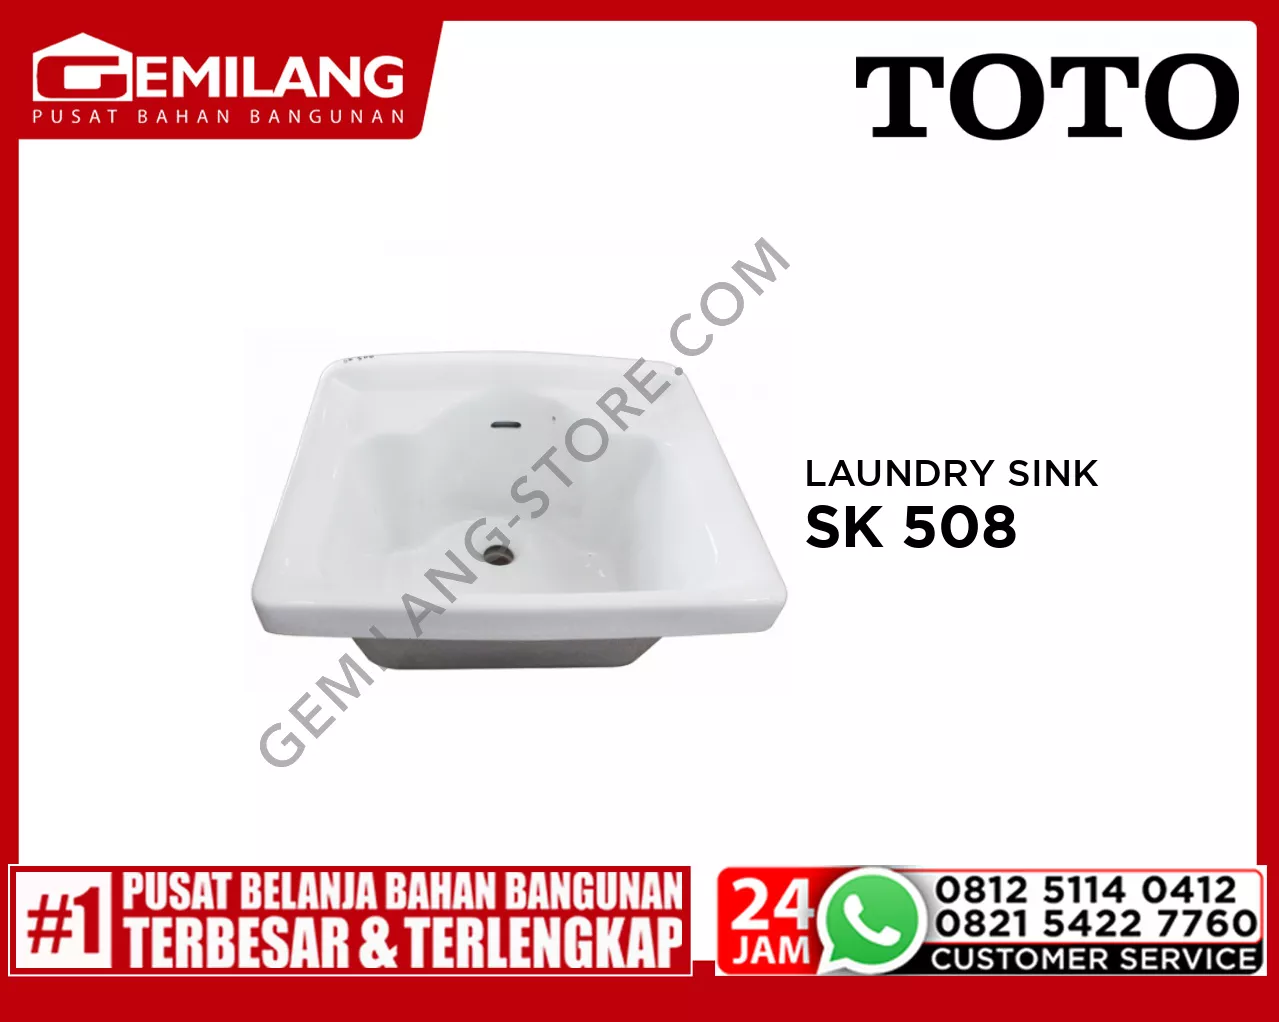 TOTO LAUNDRY SINK SK 508 WHITE